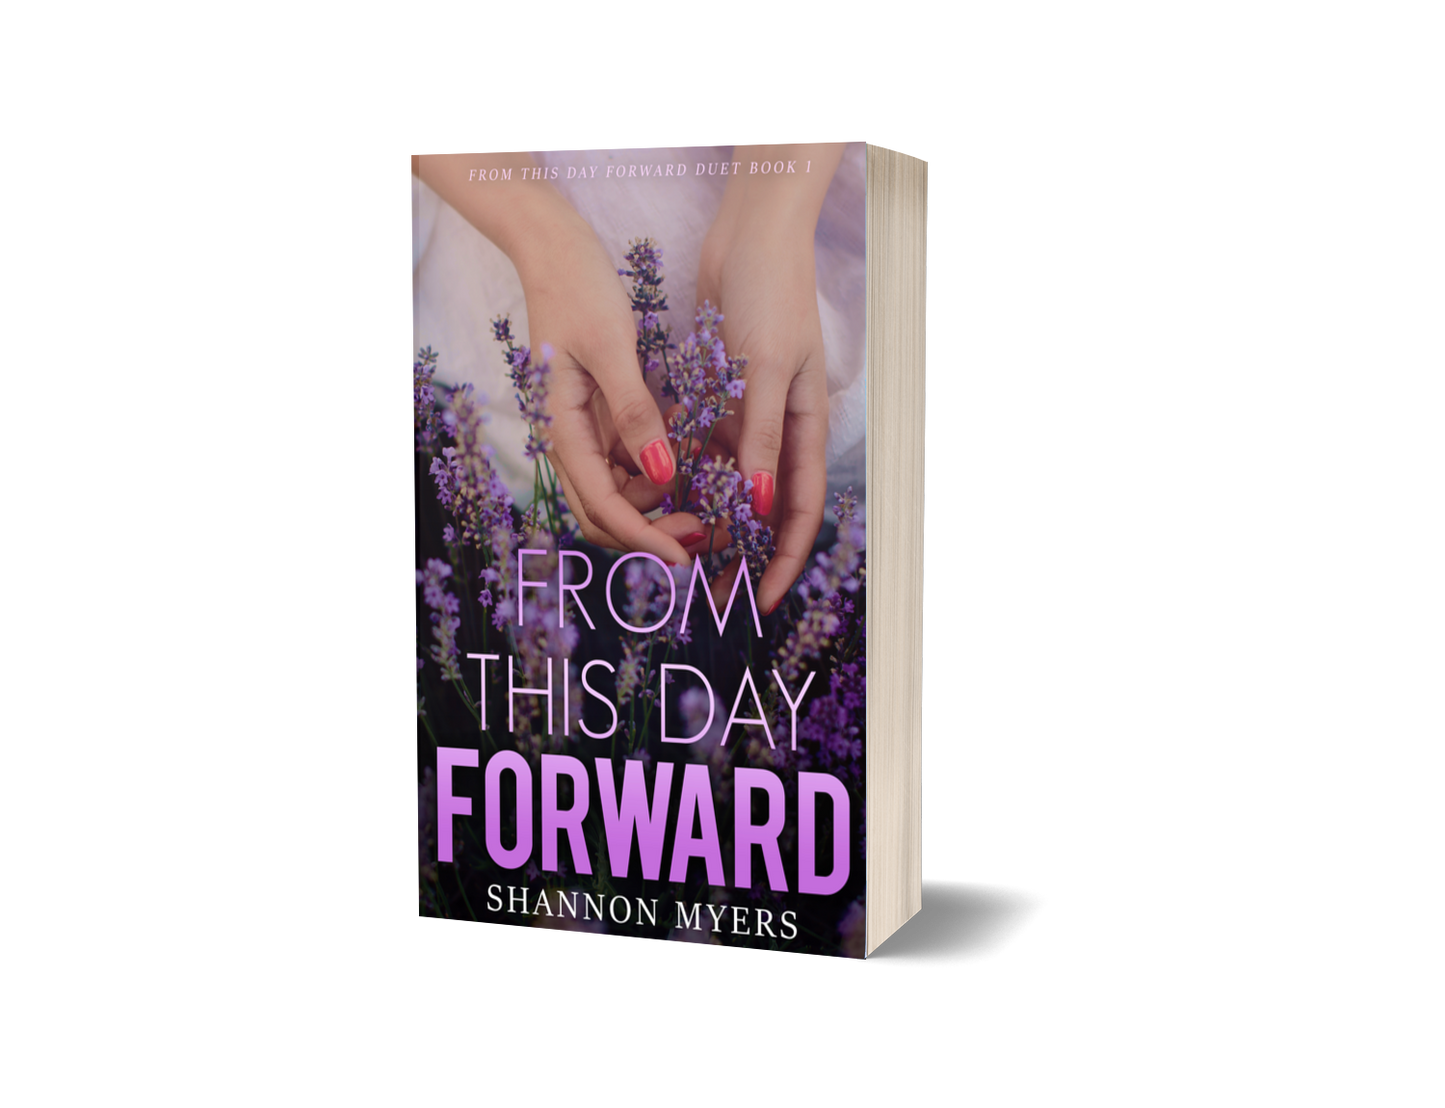 From This Day Forward (FTDF Duet: Book 1)